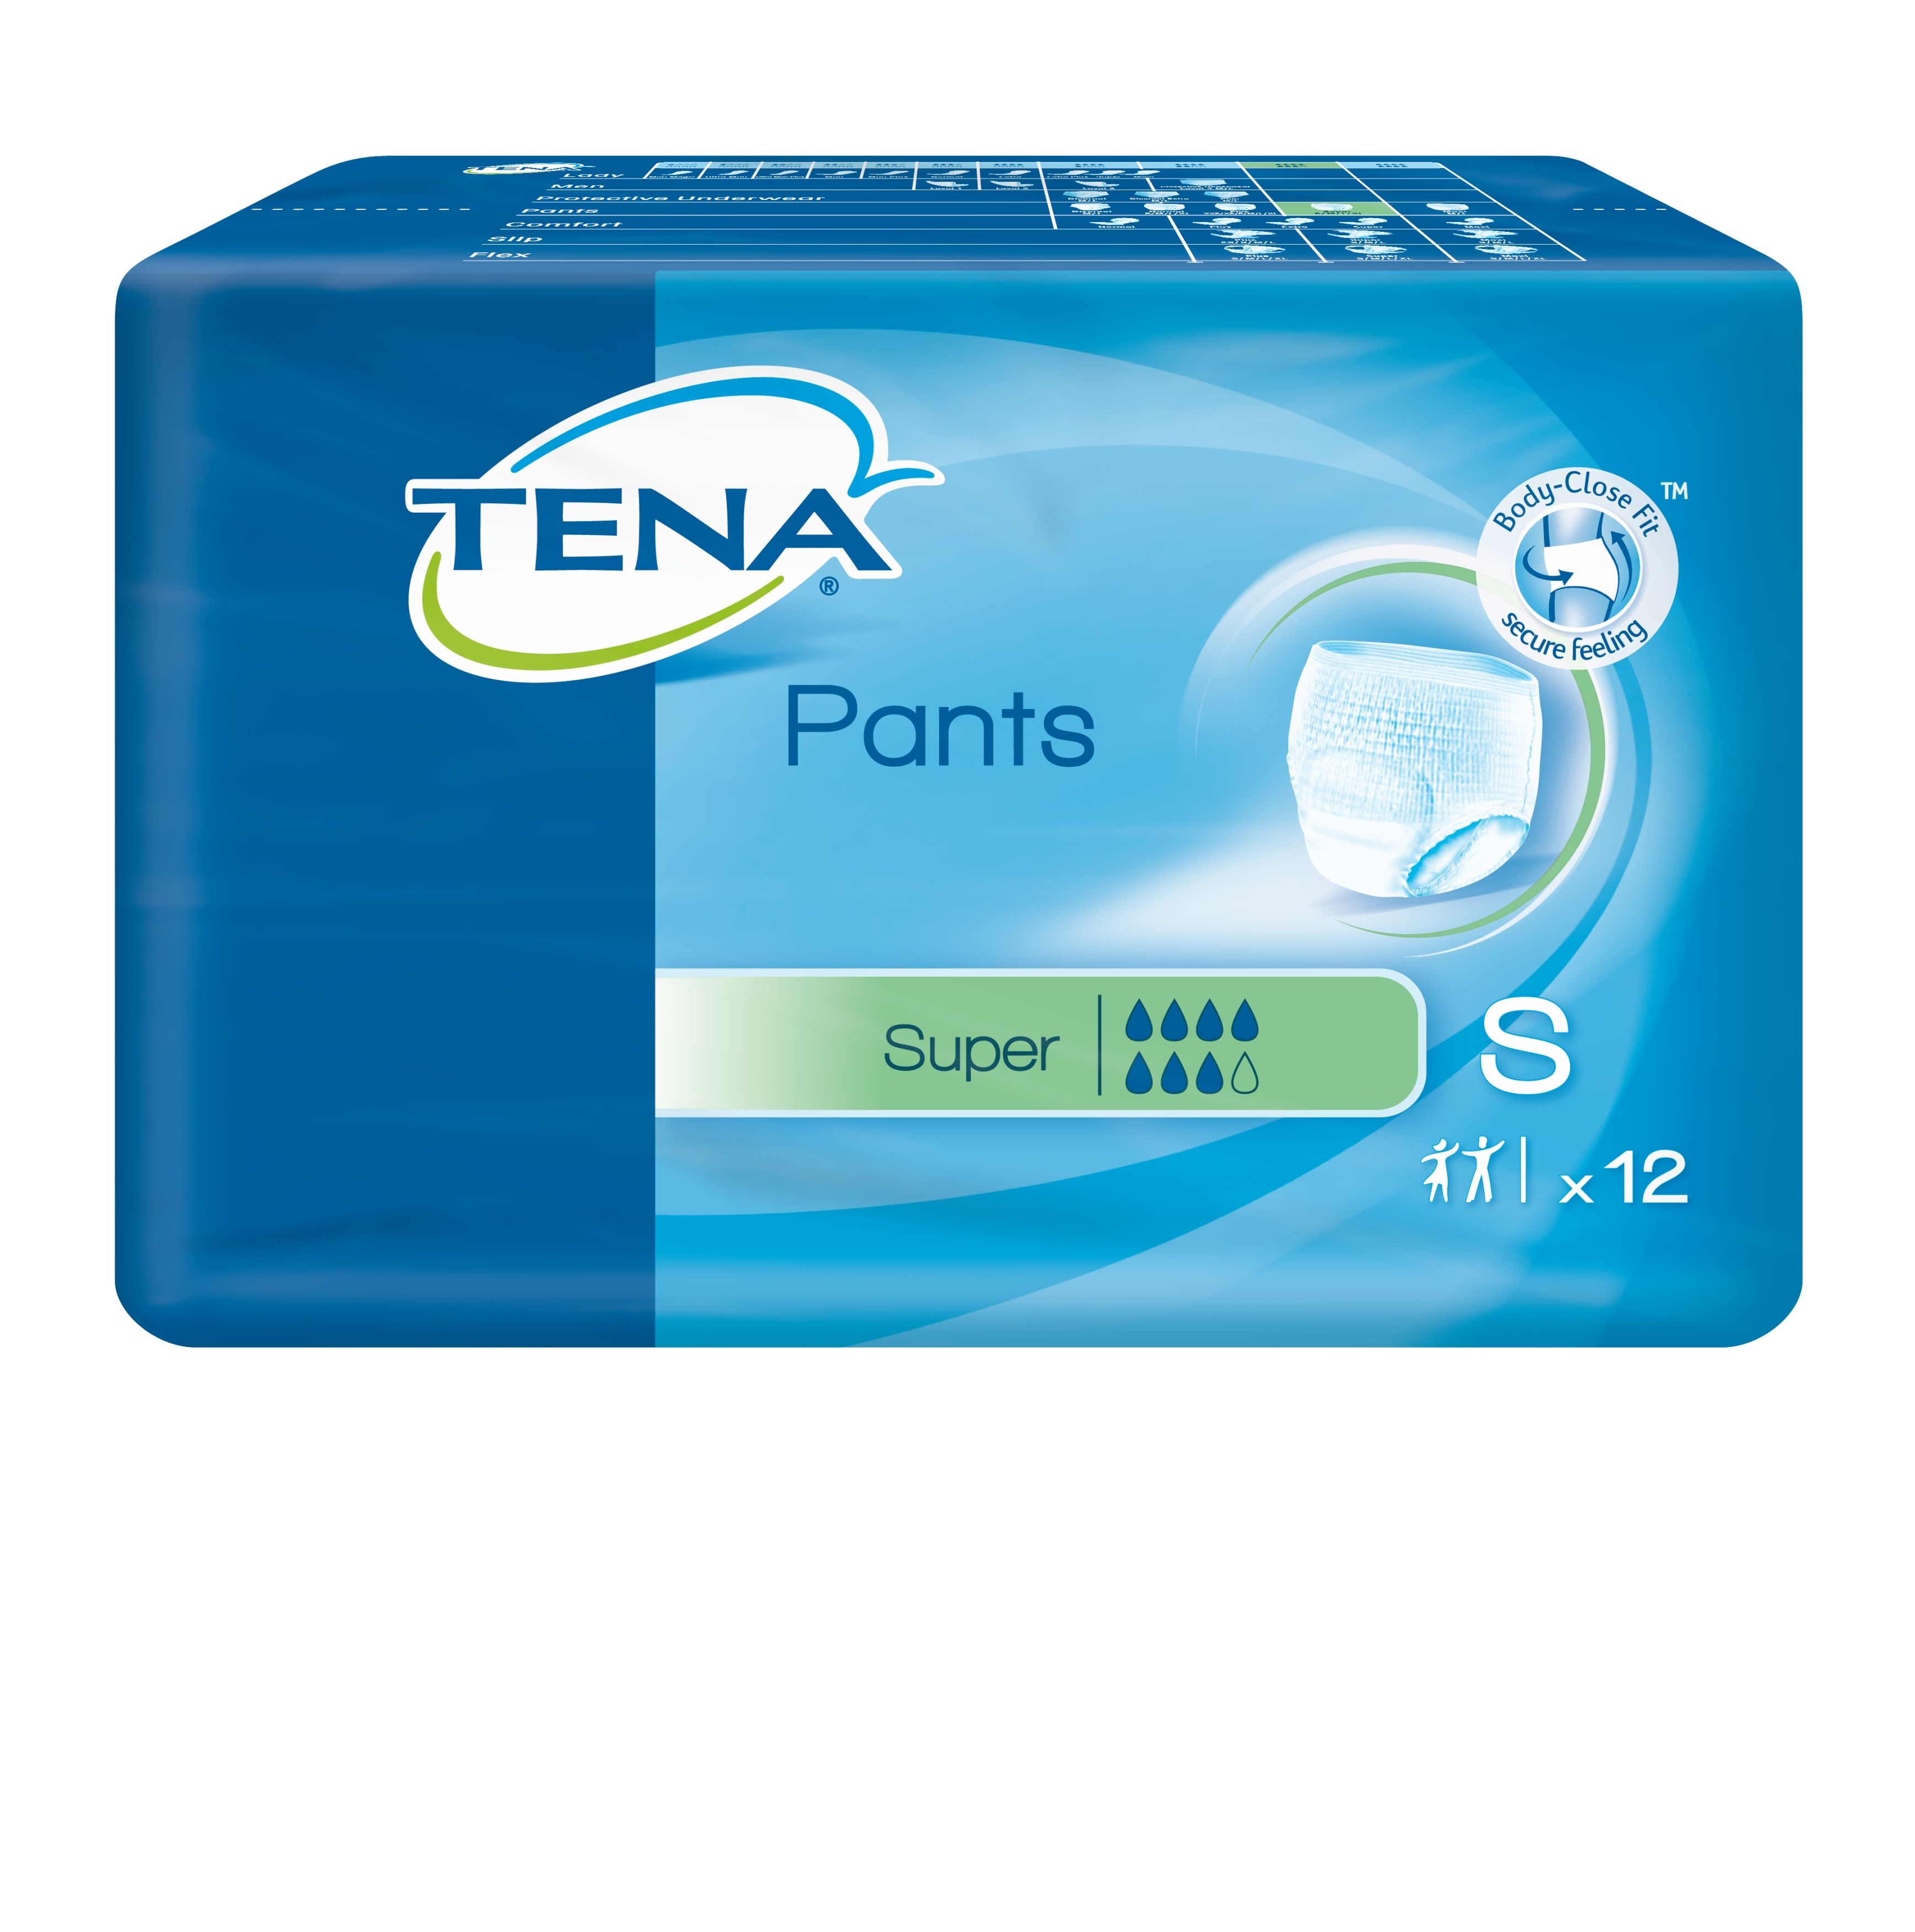 TENA Pants Super Small pack of 12 for £16.78 | Medical Equipment